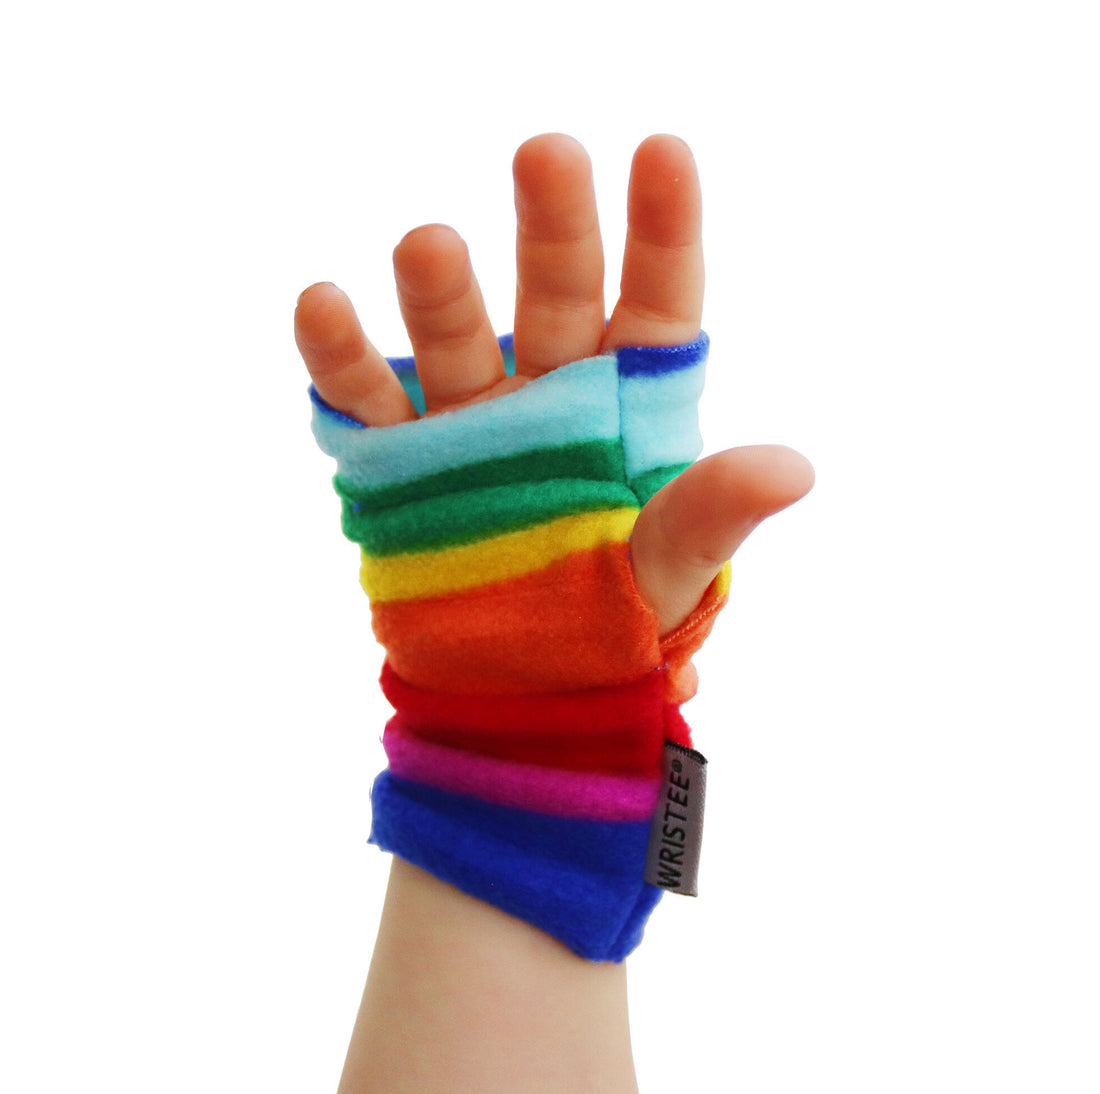 TINY PLEATED 'WRISTEES' WRISTWARMERS FOR TODDLERS | 1-3 YEARS